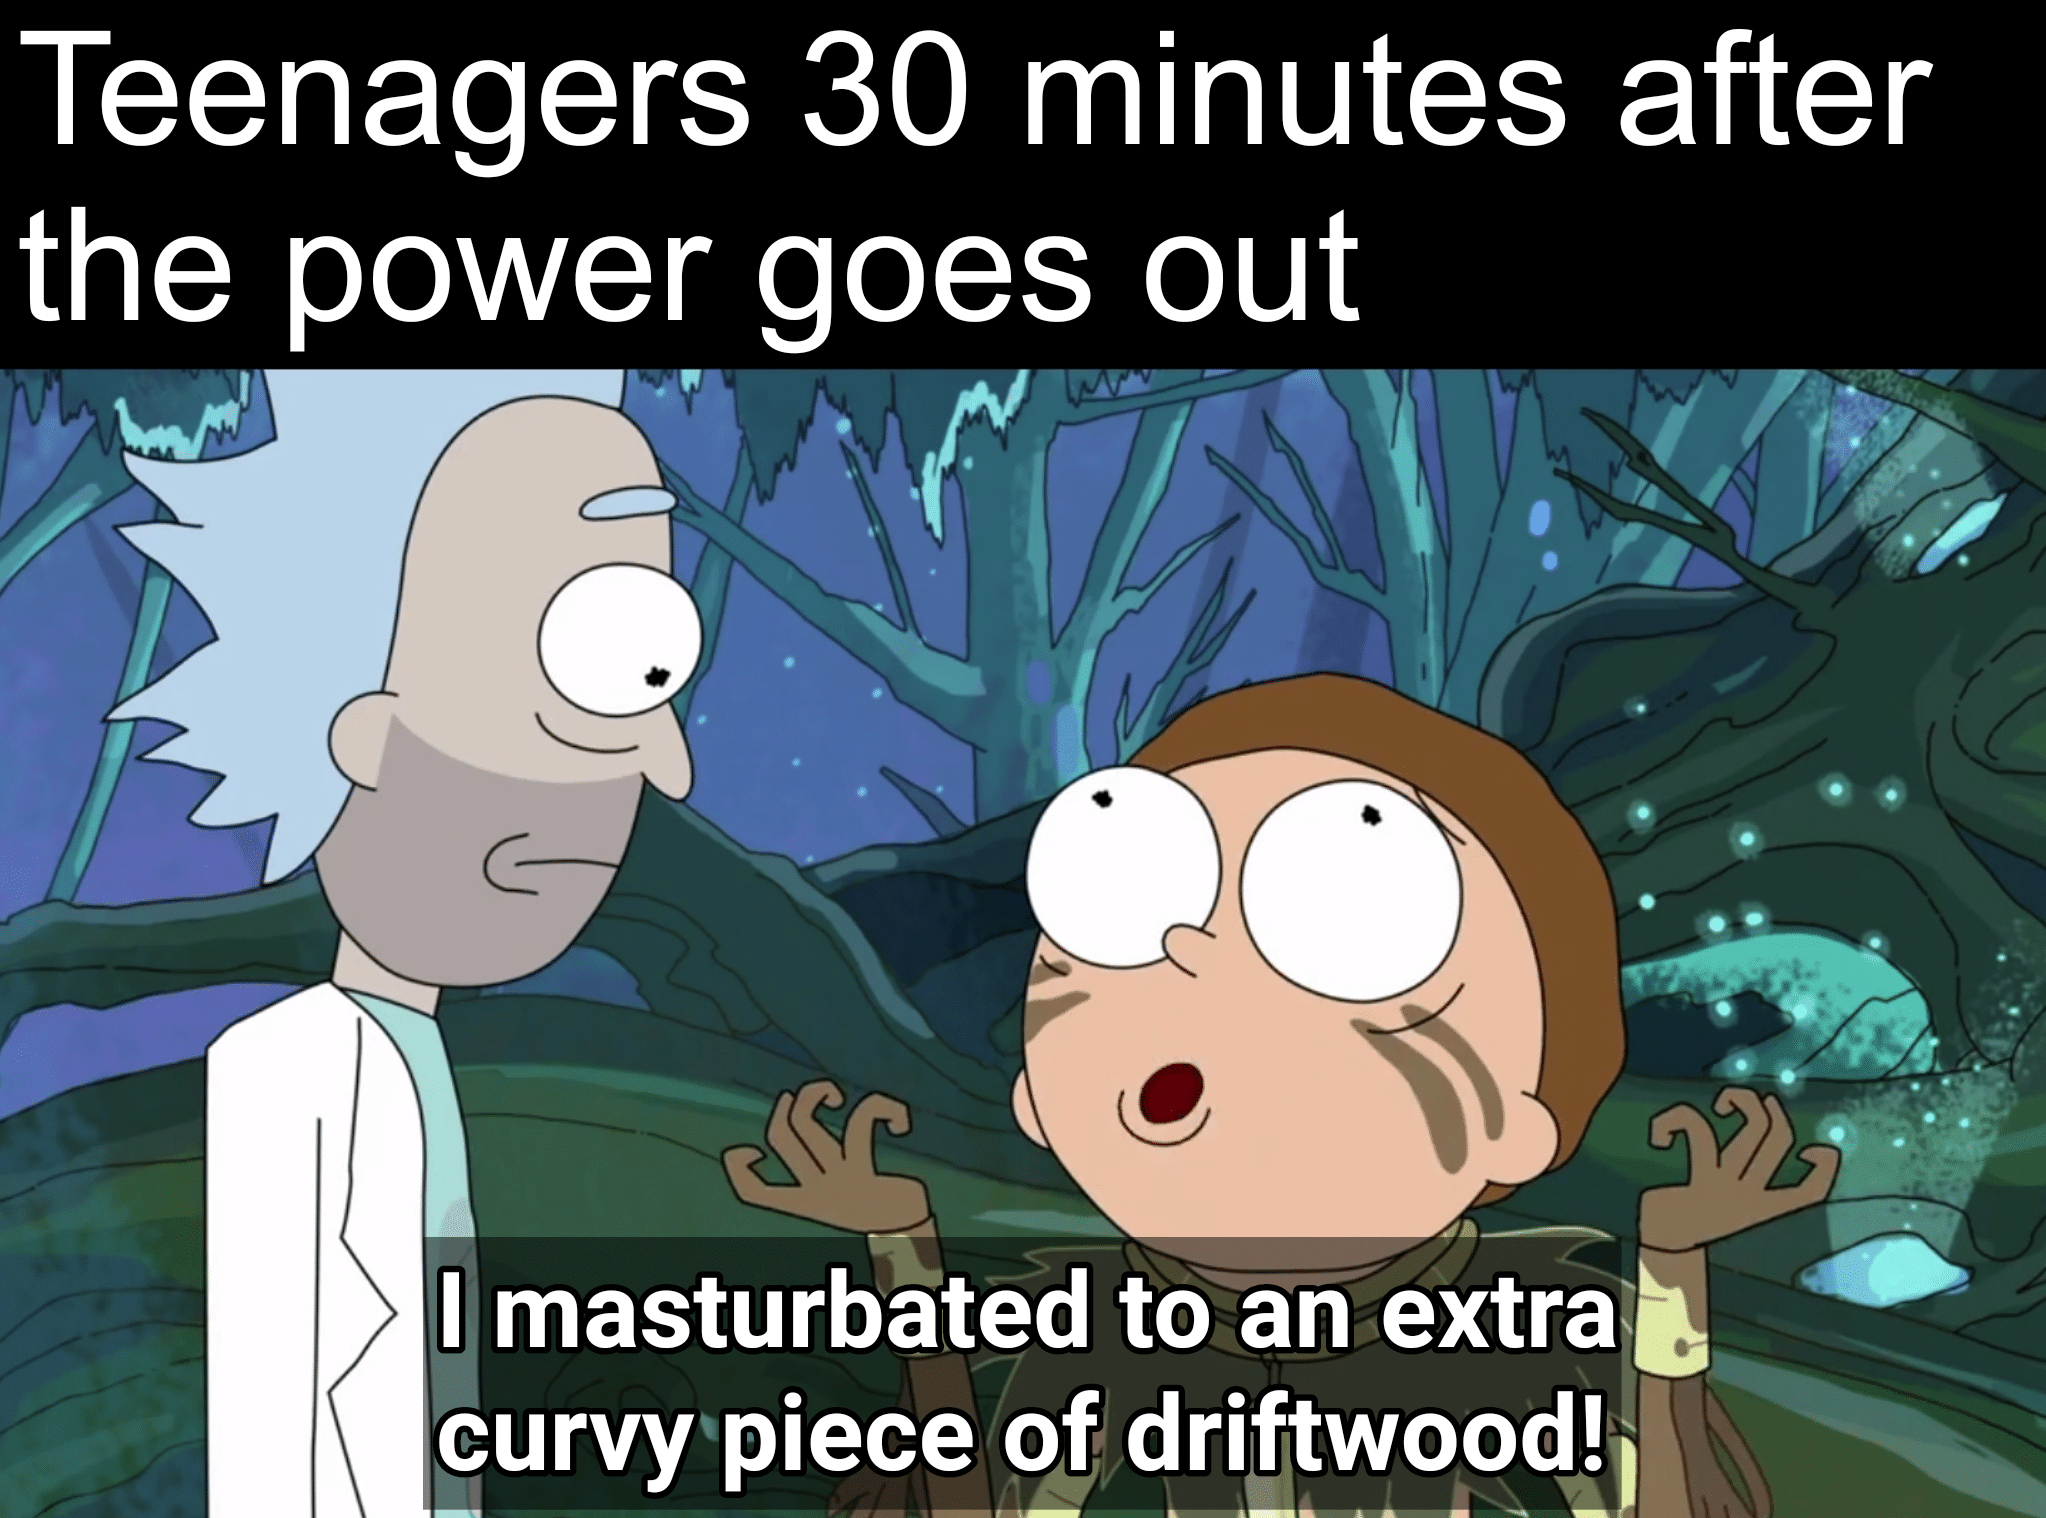 Dank, Laughs Dank Memes Dank, Laughs text: Teenagers 30 minutes after the power goes out Il masturbated to an extra curvy•piece of dri!twood! 